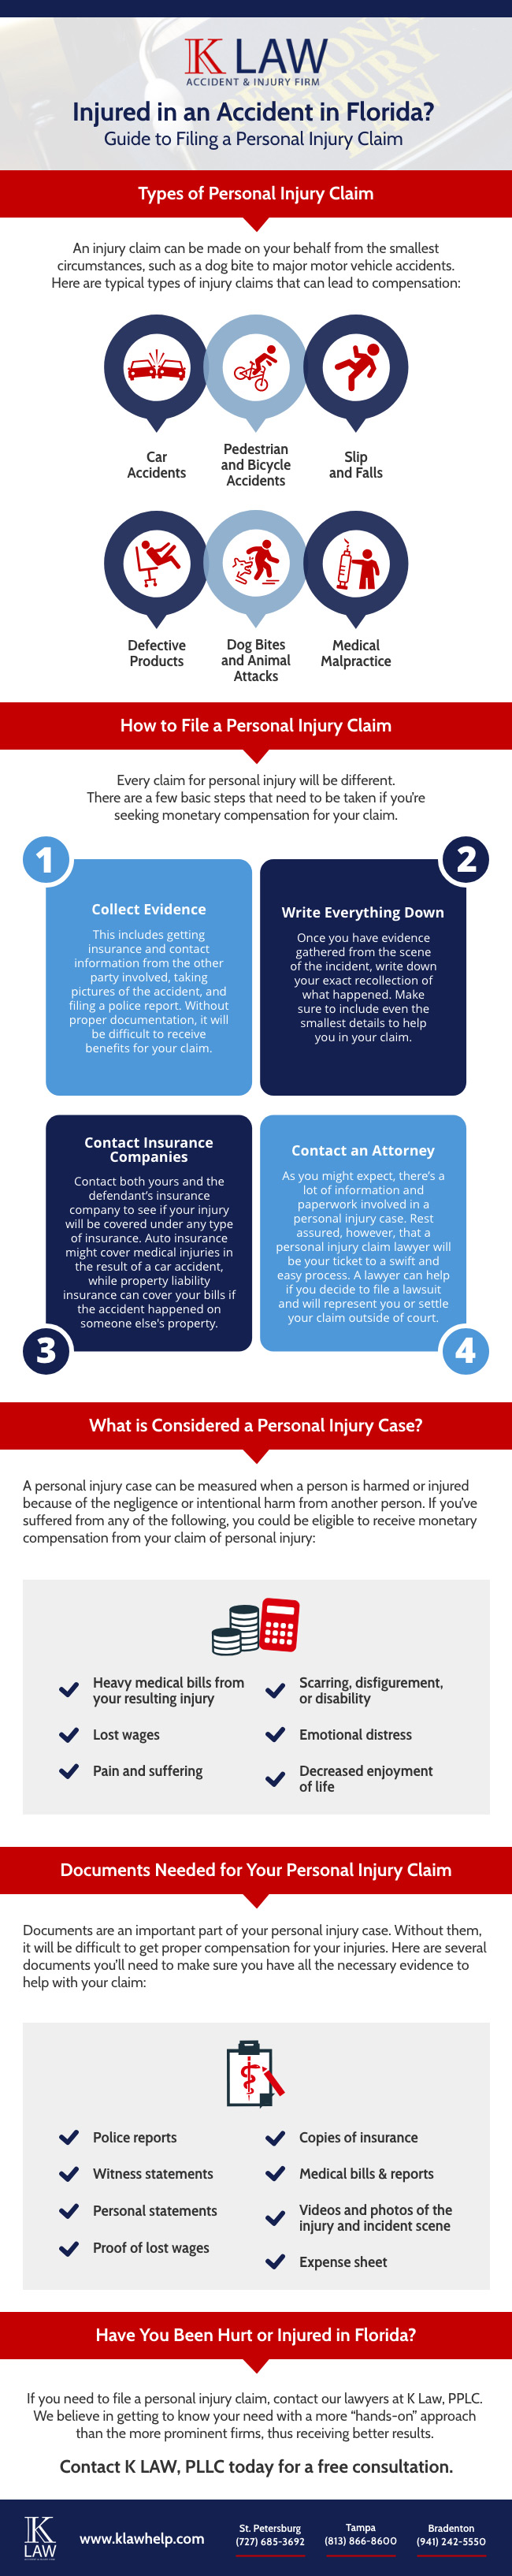 Kenneth J. Allen Law Group Accident Attorney